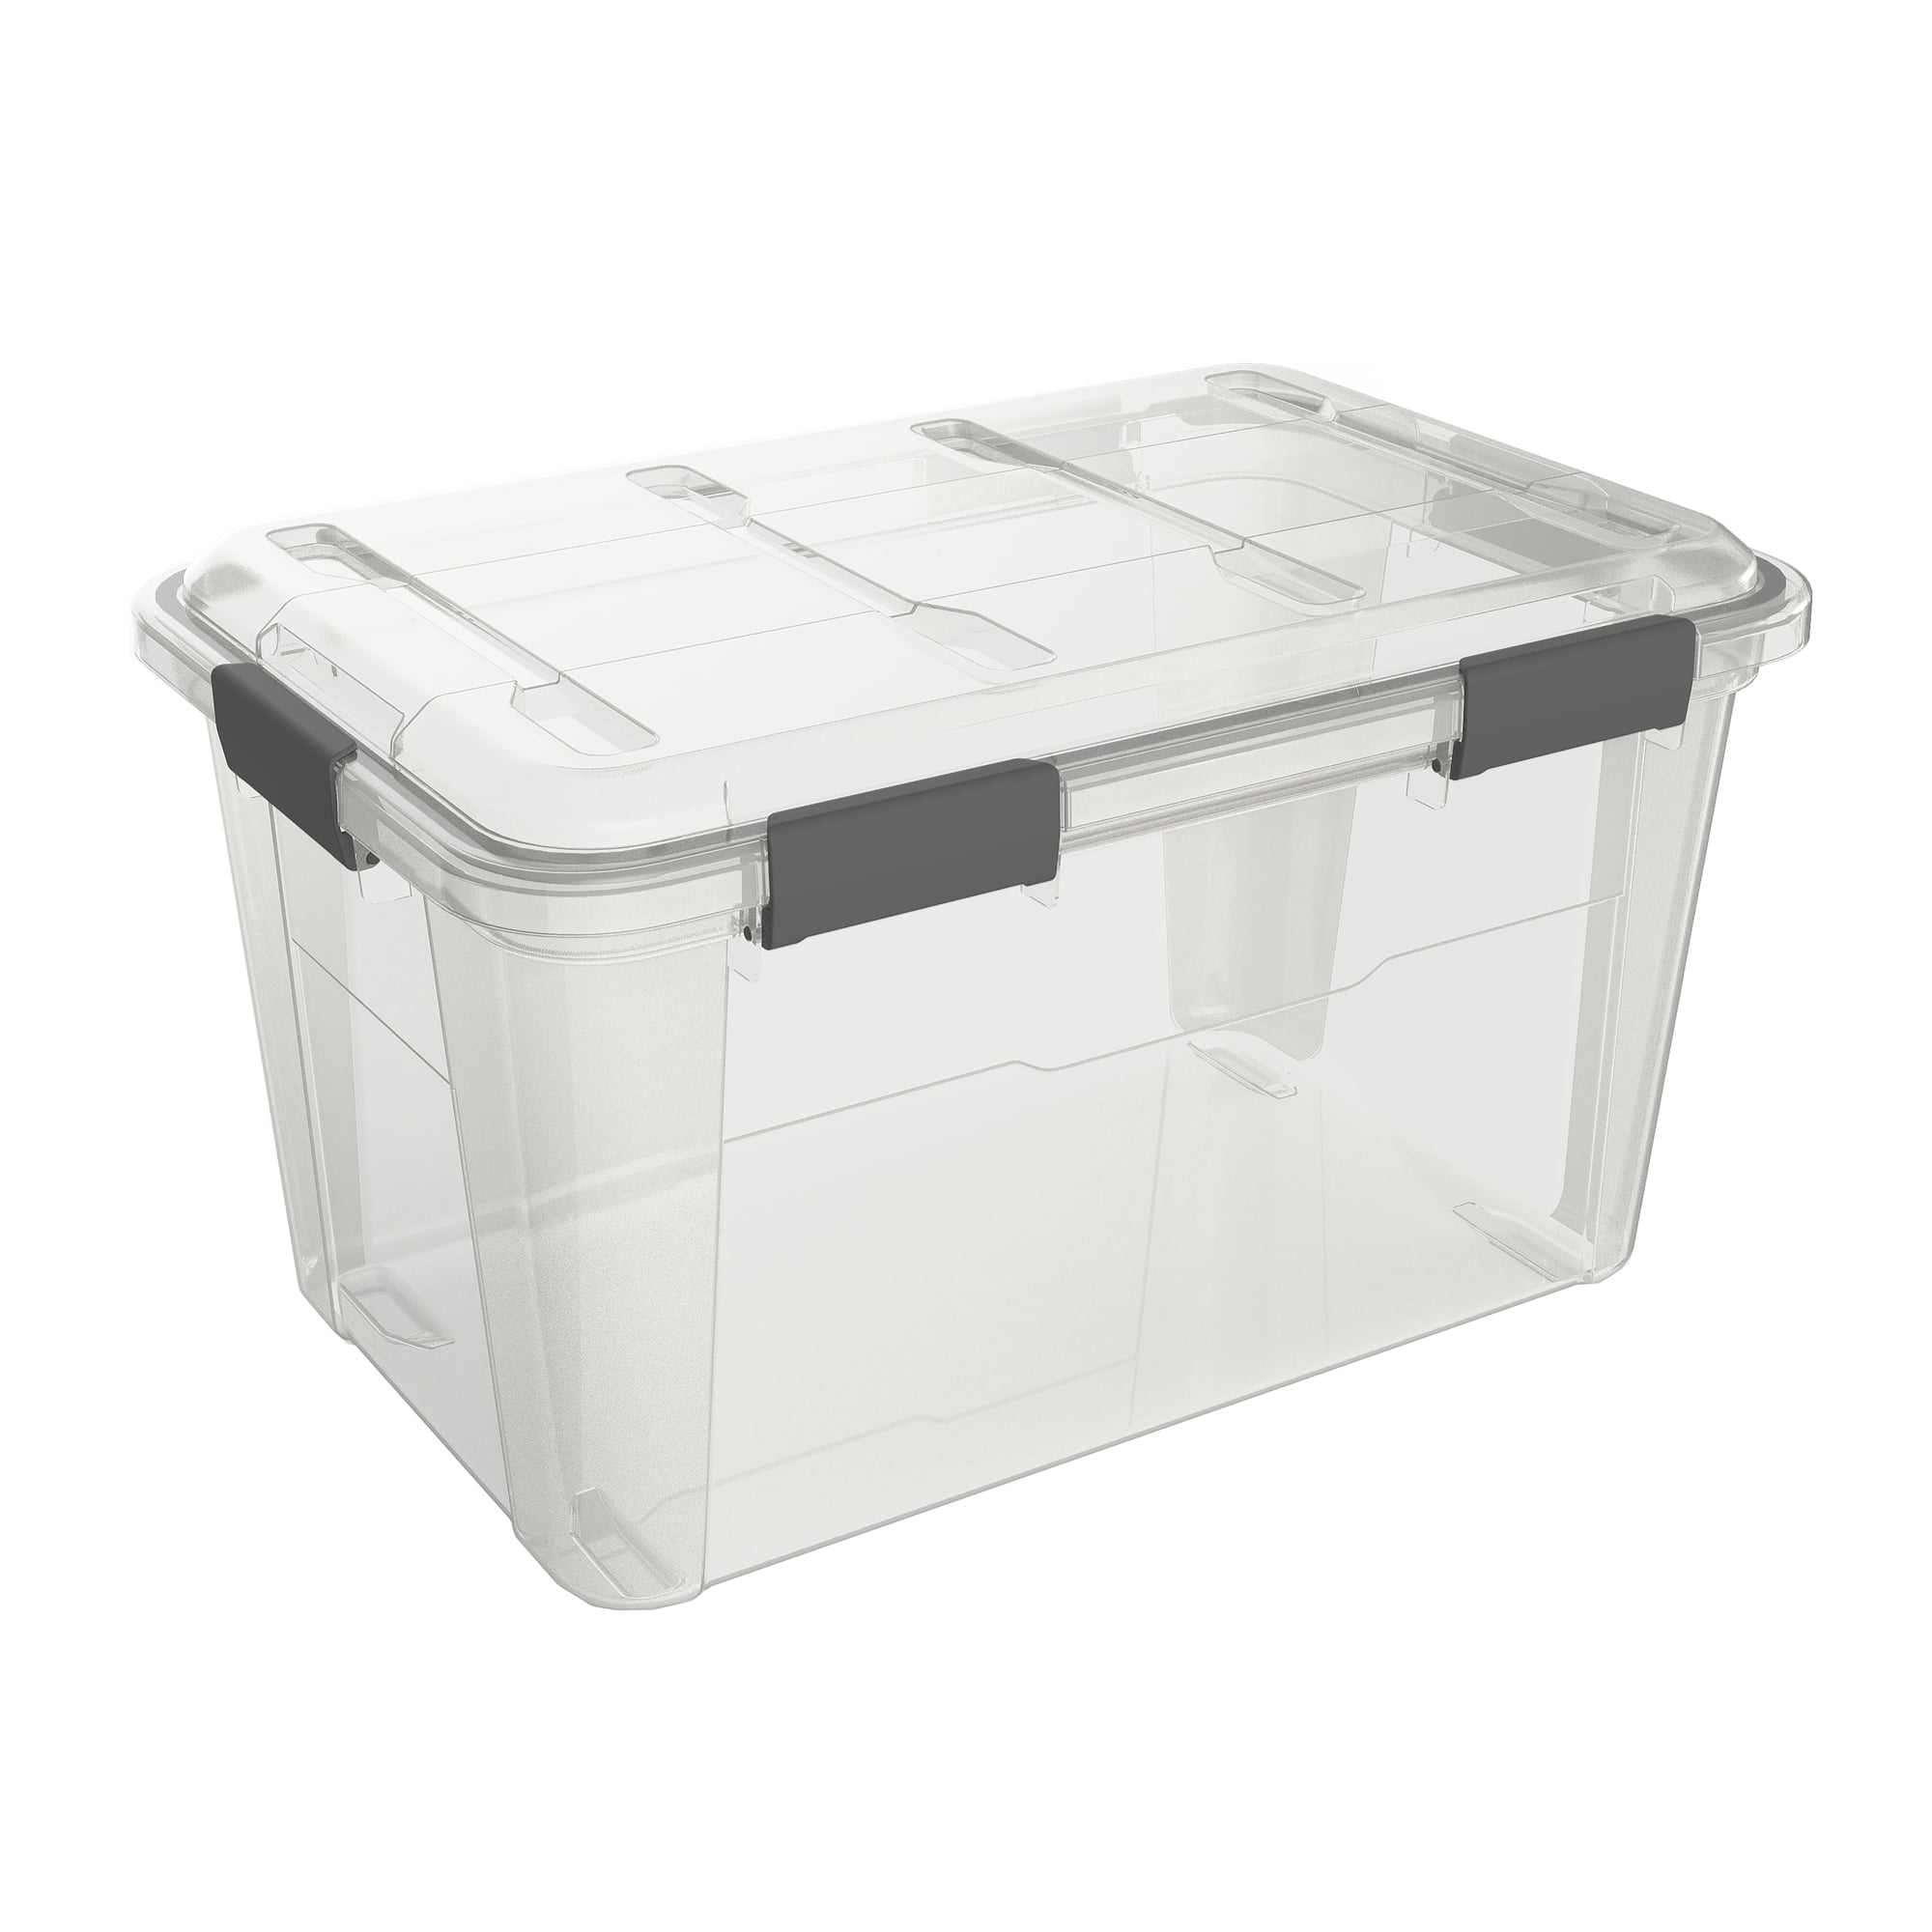  ClearSpace Plastic Storage Bins with Lids – Perfect